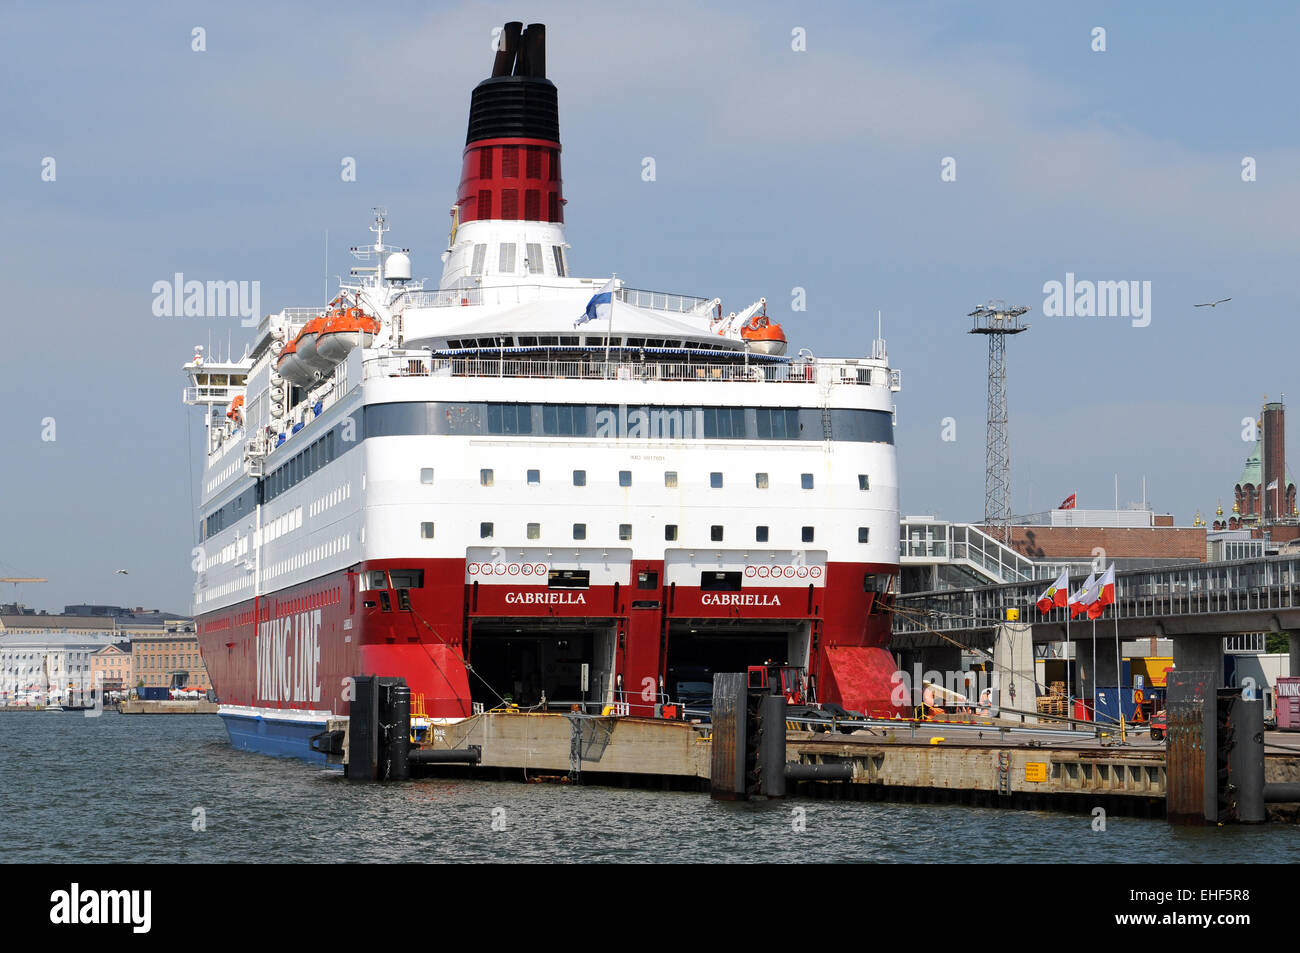 Viking Gabriella High Resolution Stock Photography and Images - Alamy